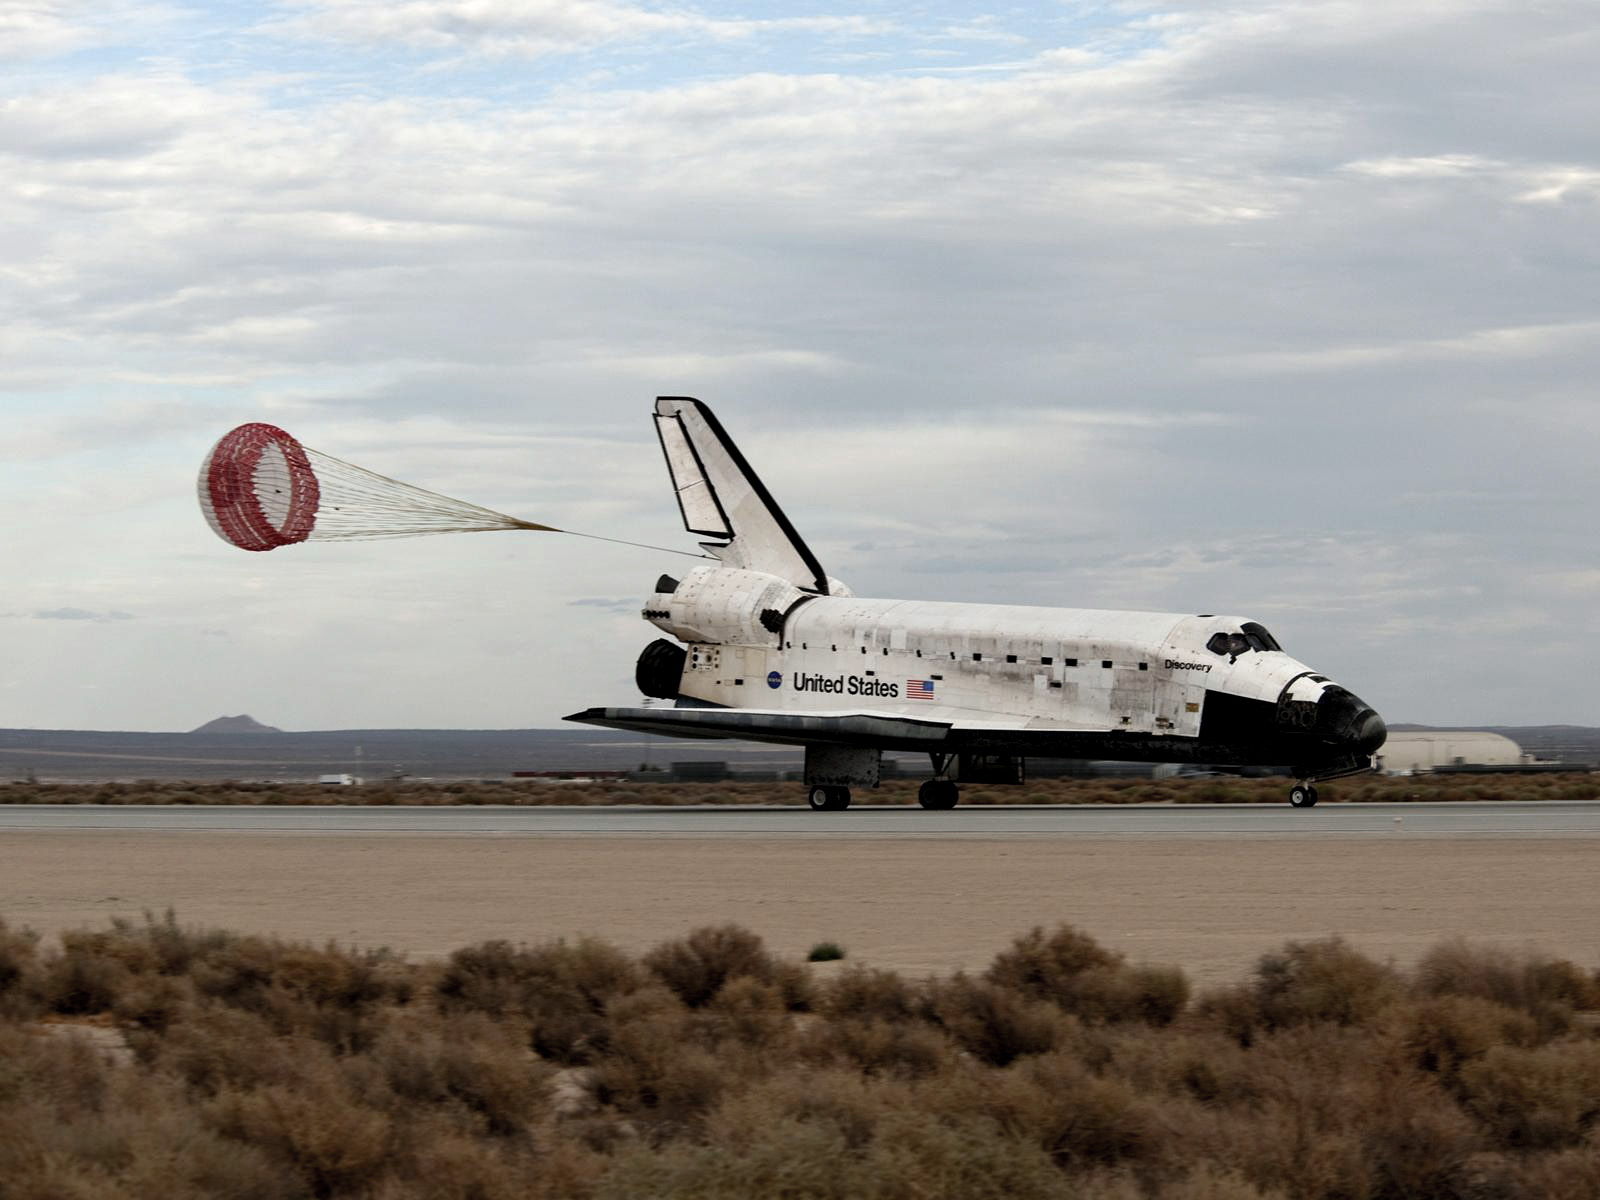 Space in Images - 2009 - 09 - Space Shuttle Discovery slows to a ...